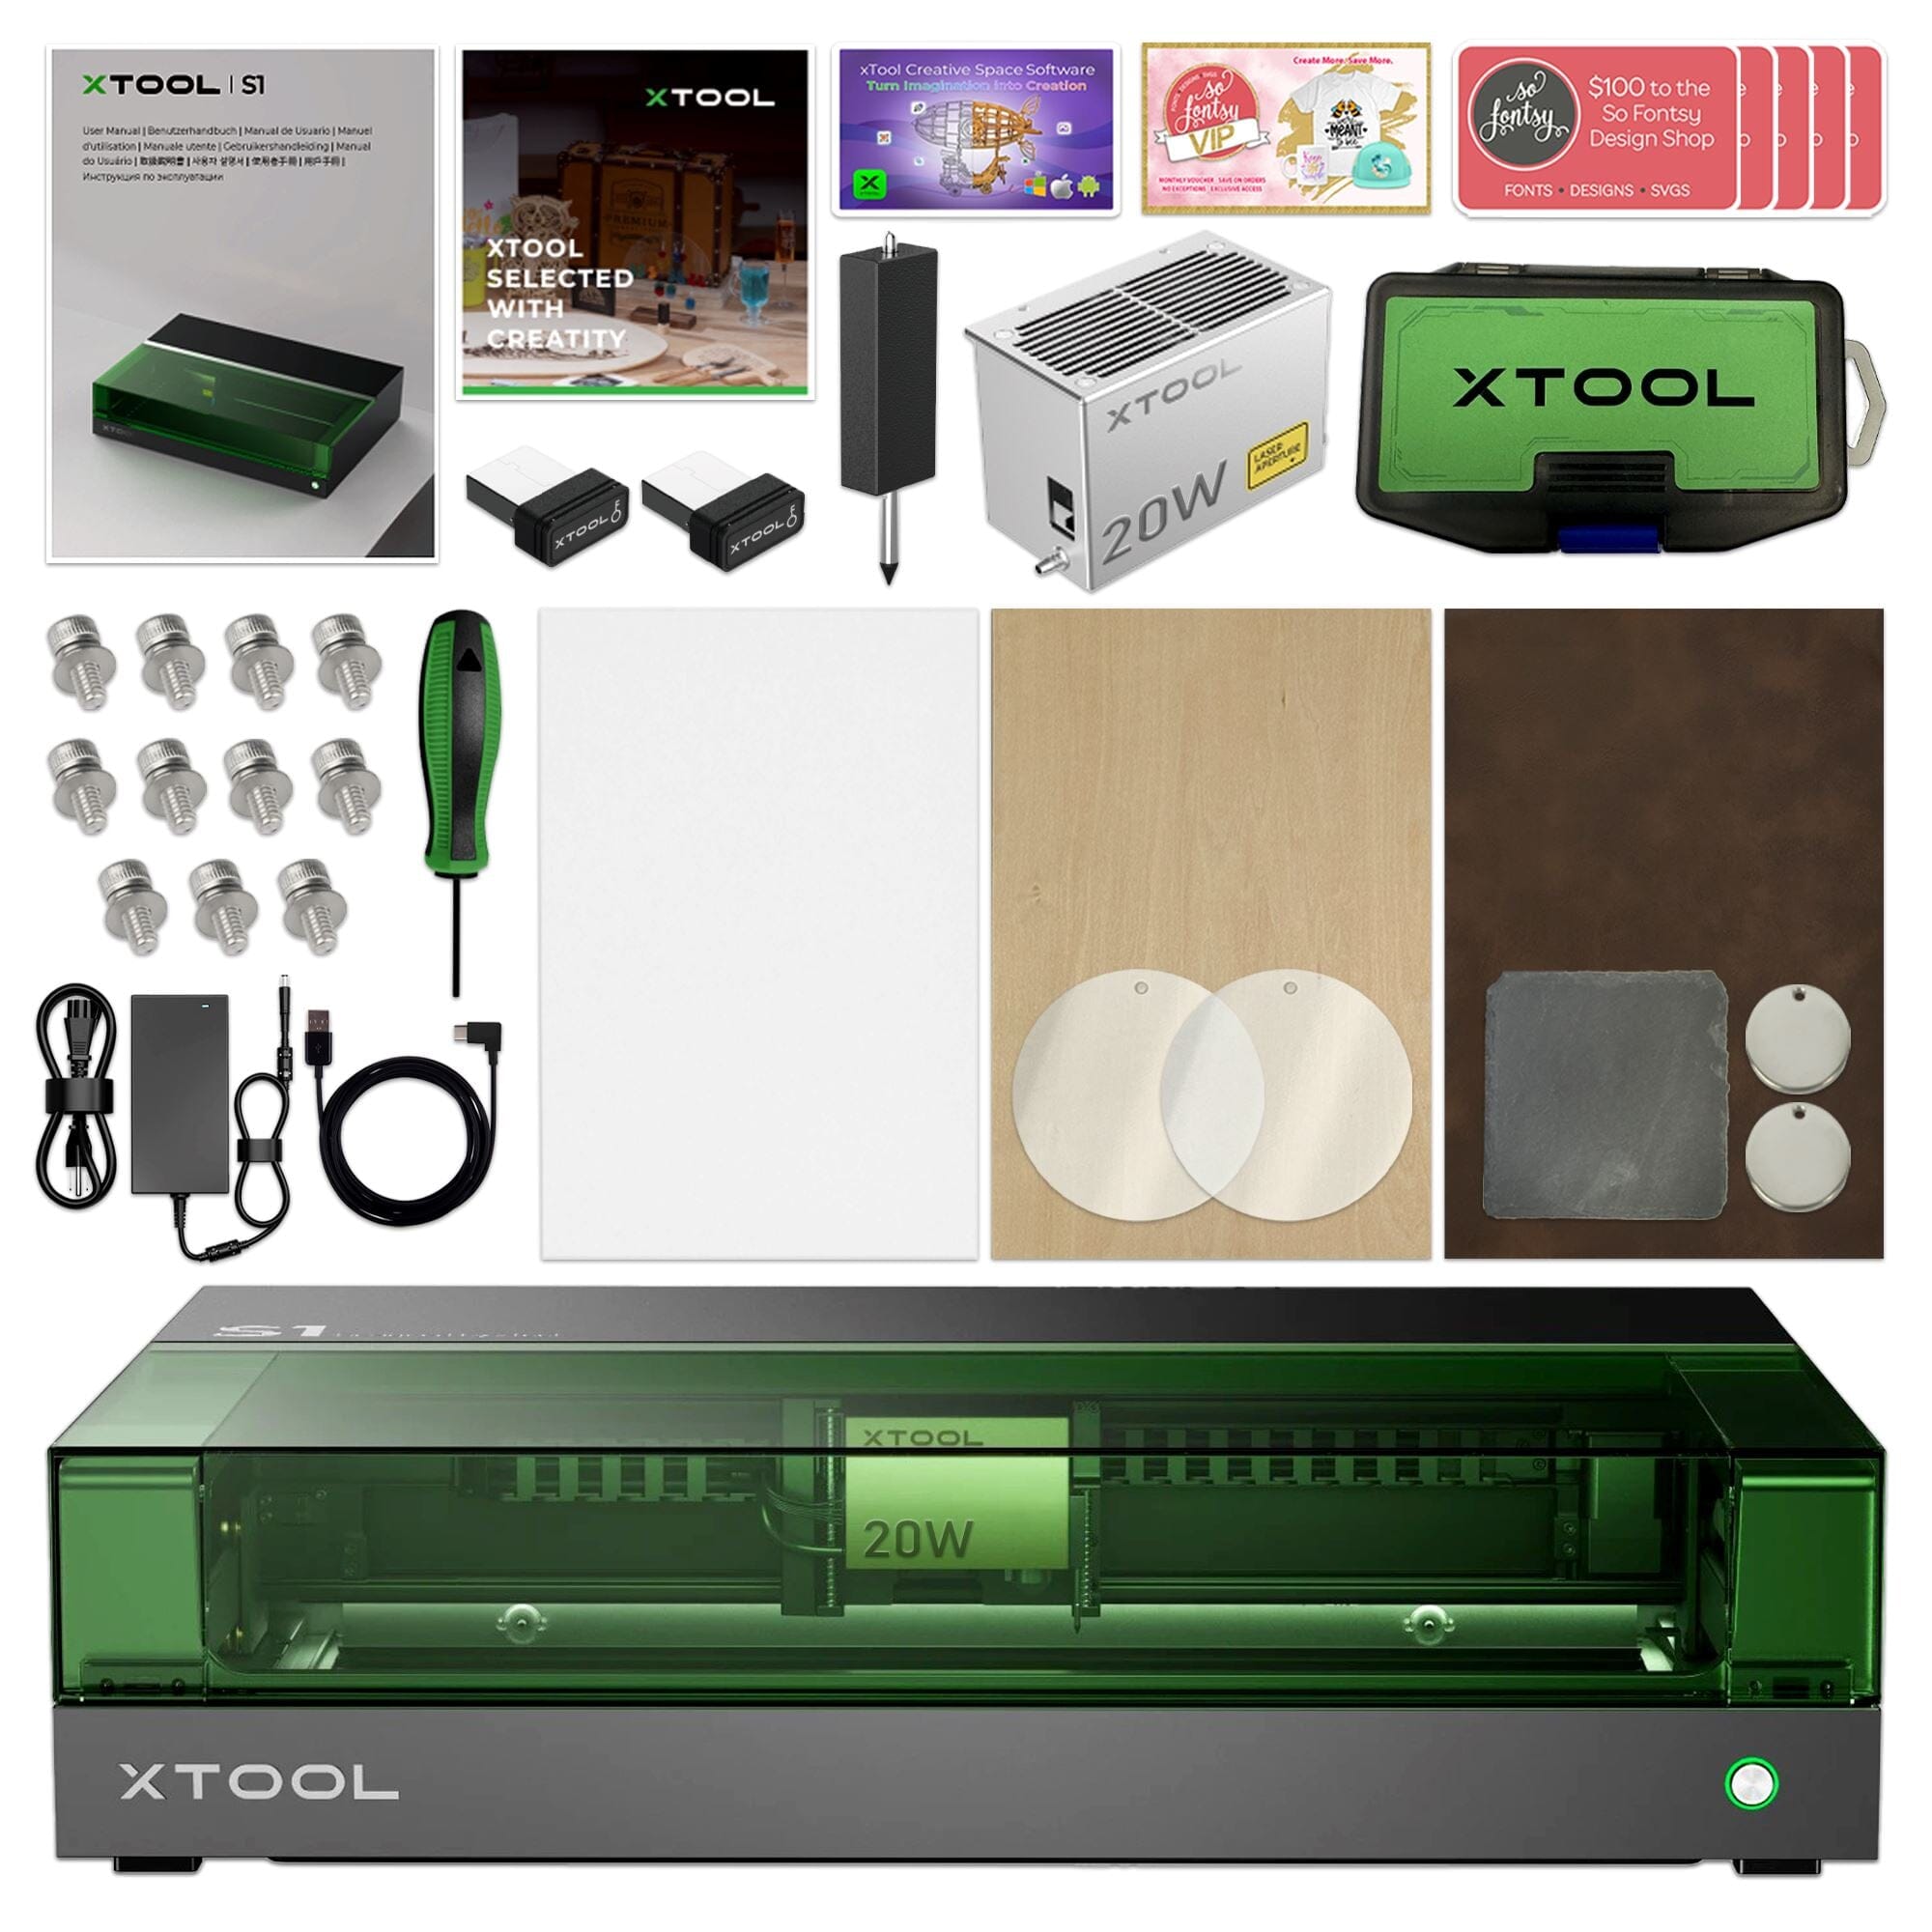 Introducing the xTool S1 Laser Cutting Machine!